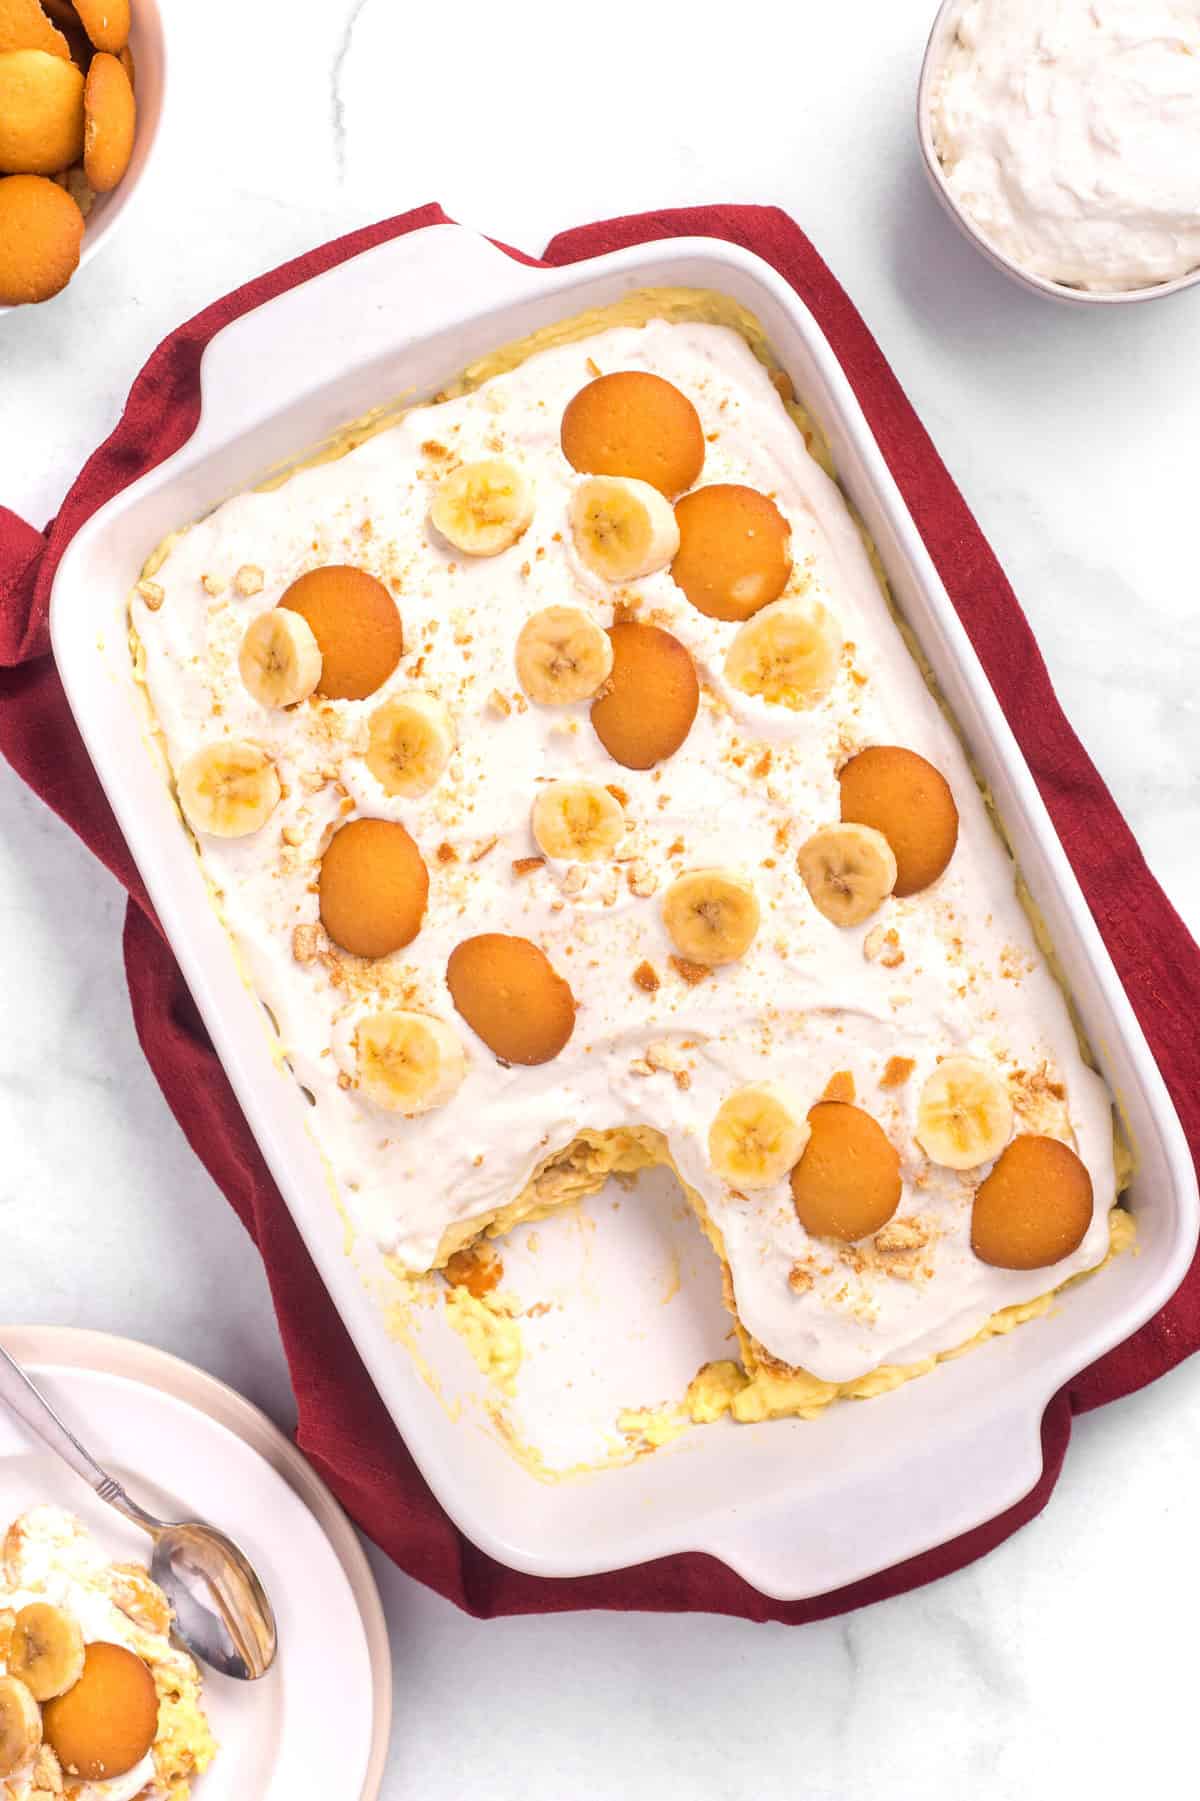 top view image of layered banana pudding served in a casserole dish